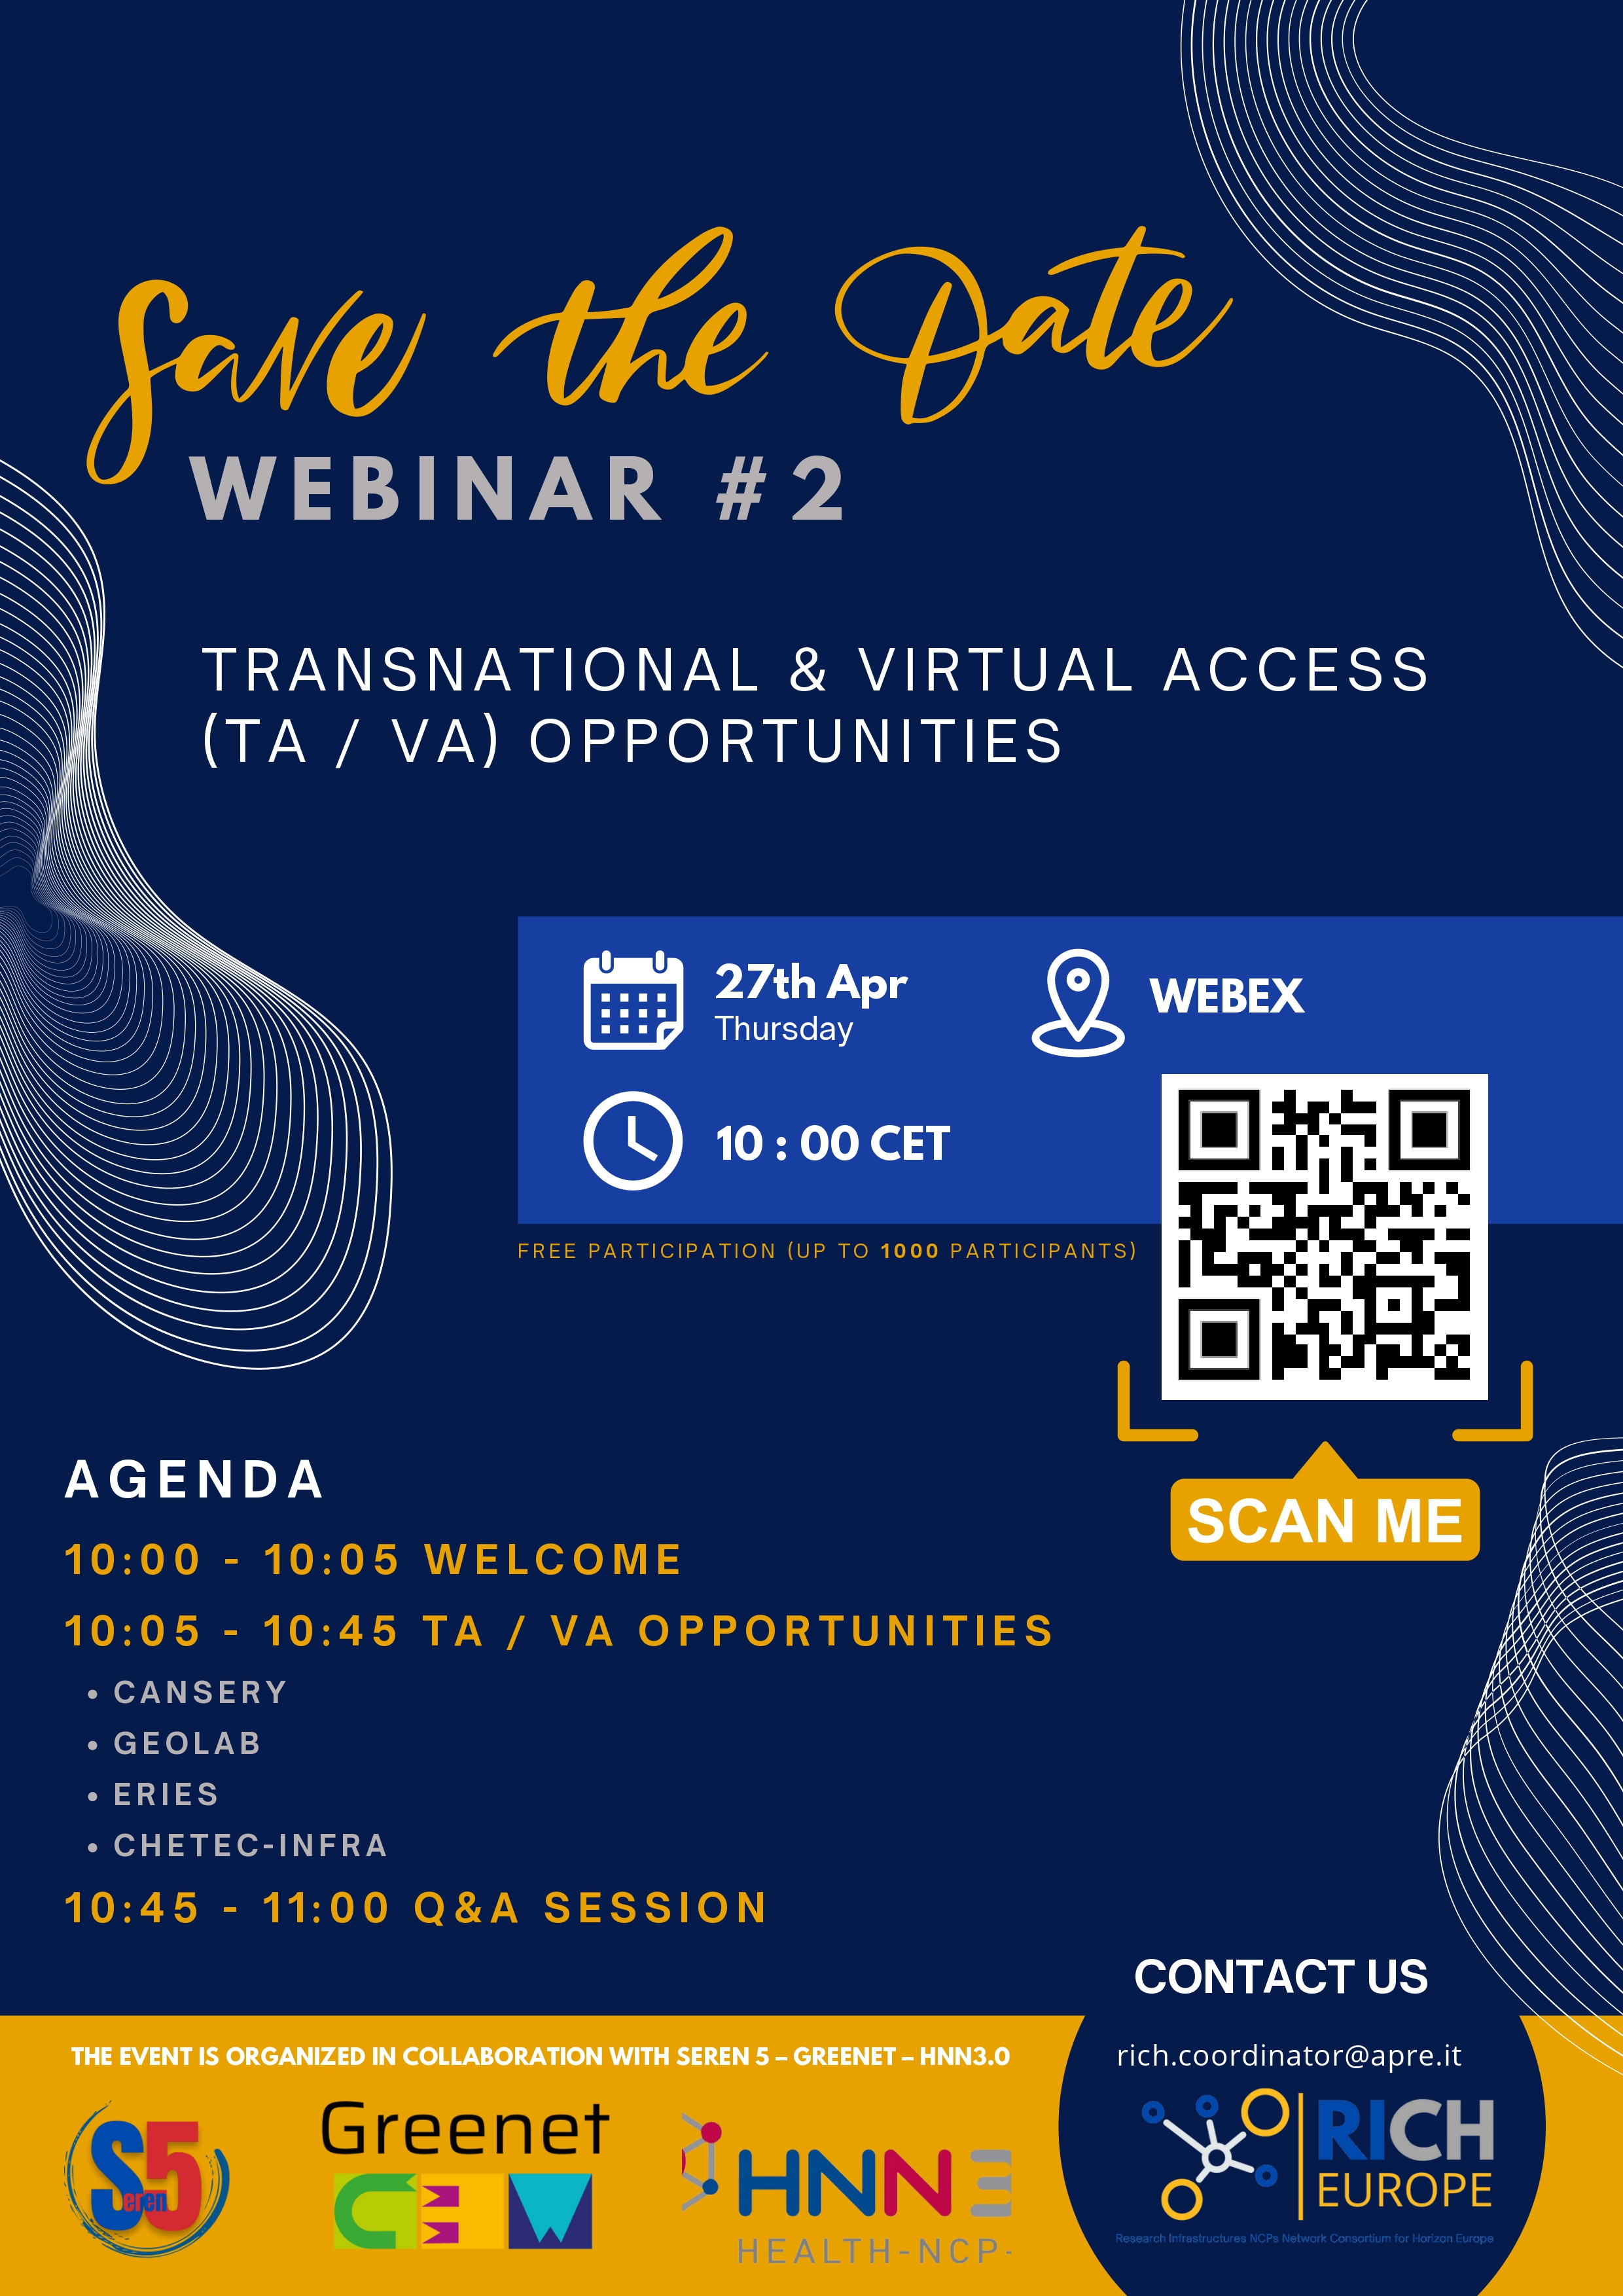 Second Webinar of RICH Europe on Transnational and Virtual Access Opportunities